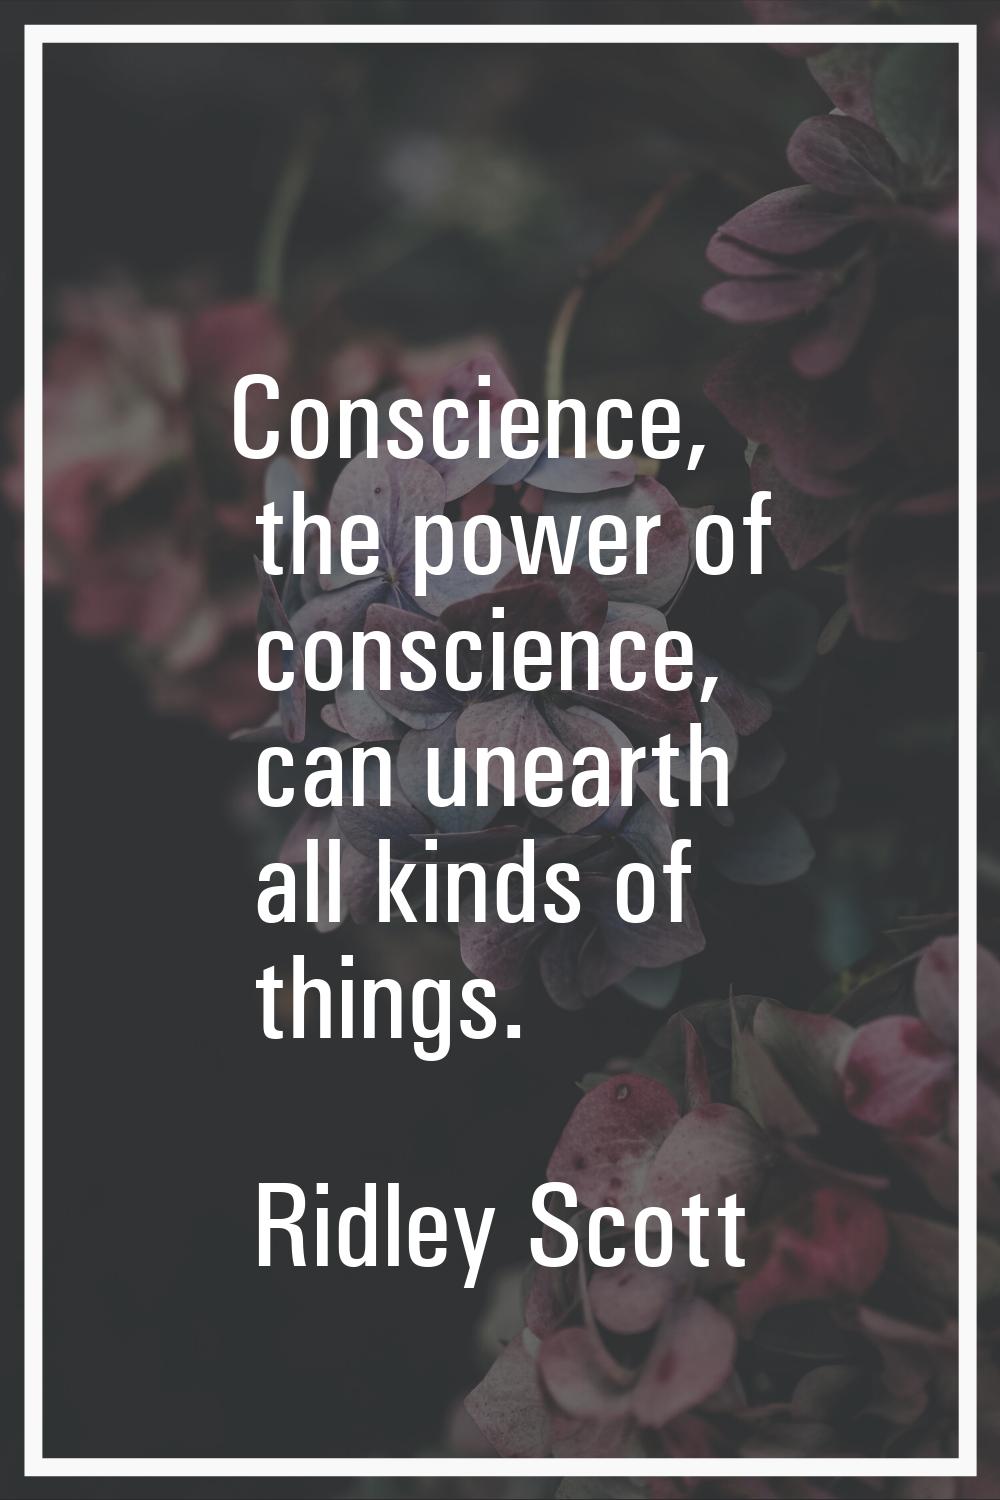 Conscience, the power of conscience, can unearth all kinds of things.